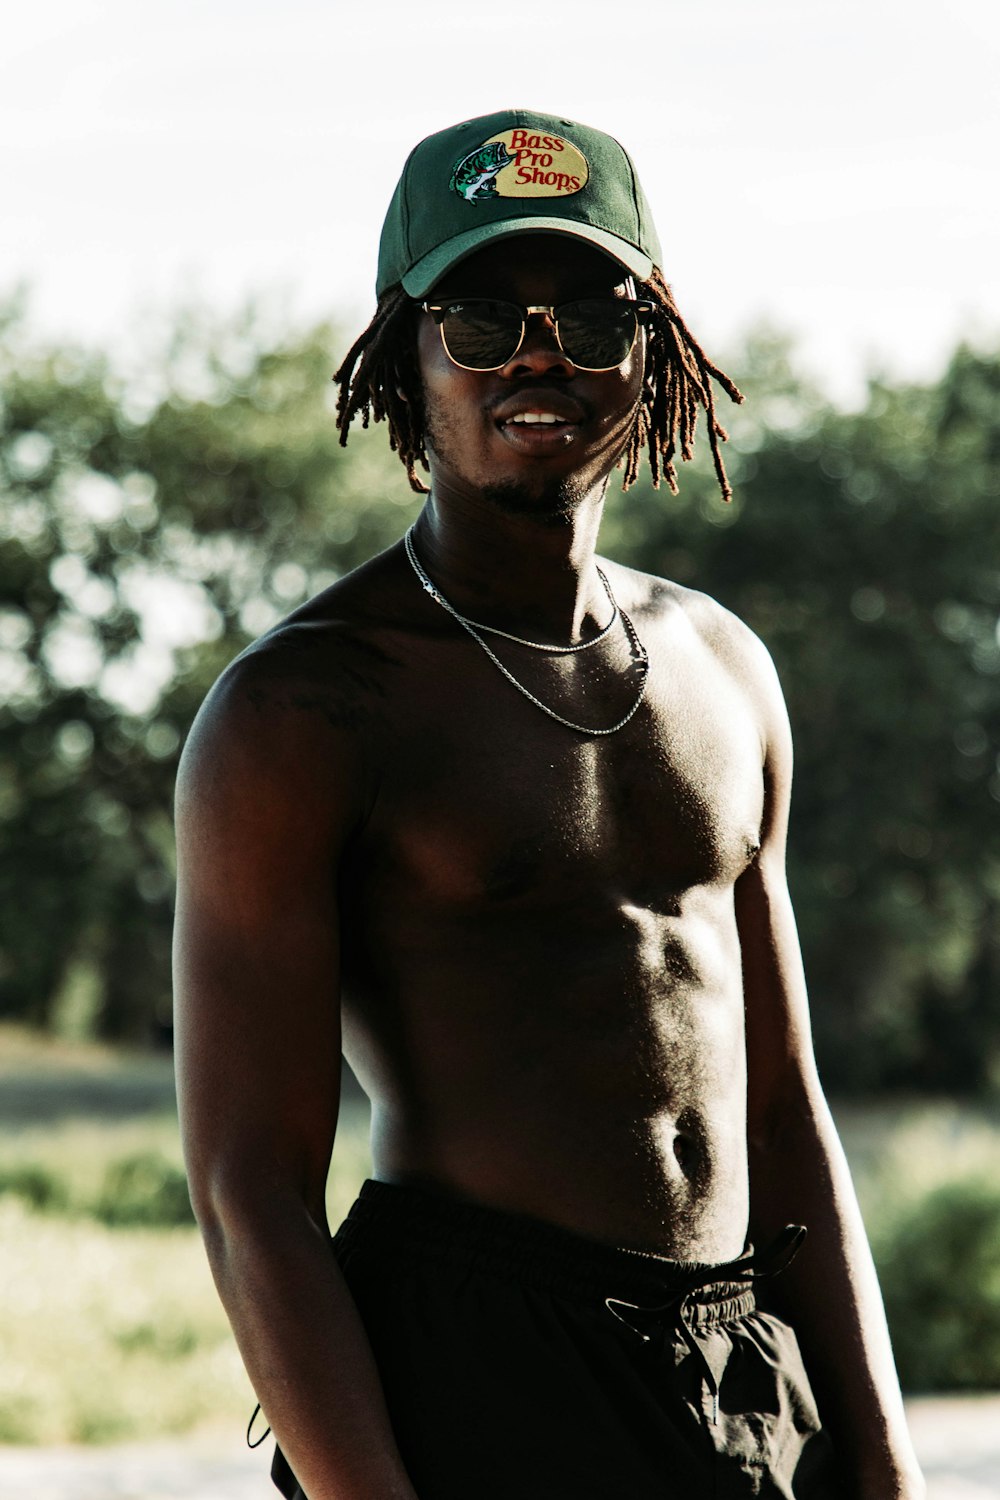 a shirtless man wearing a green hat and sunglasses